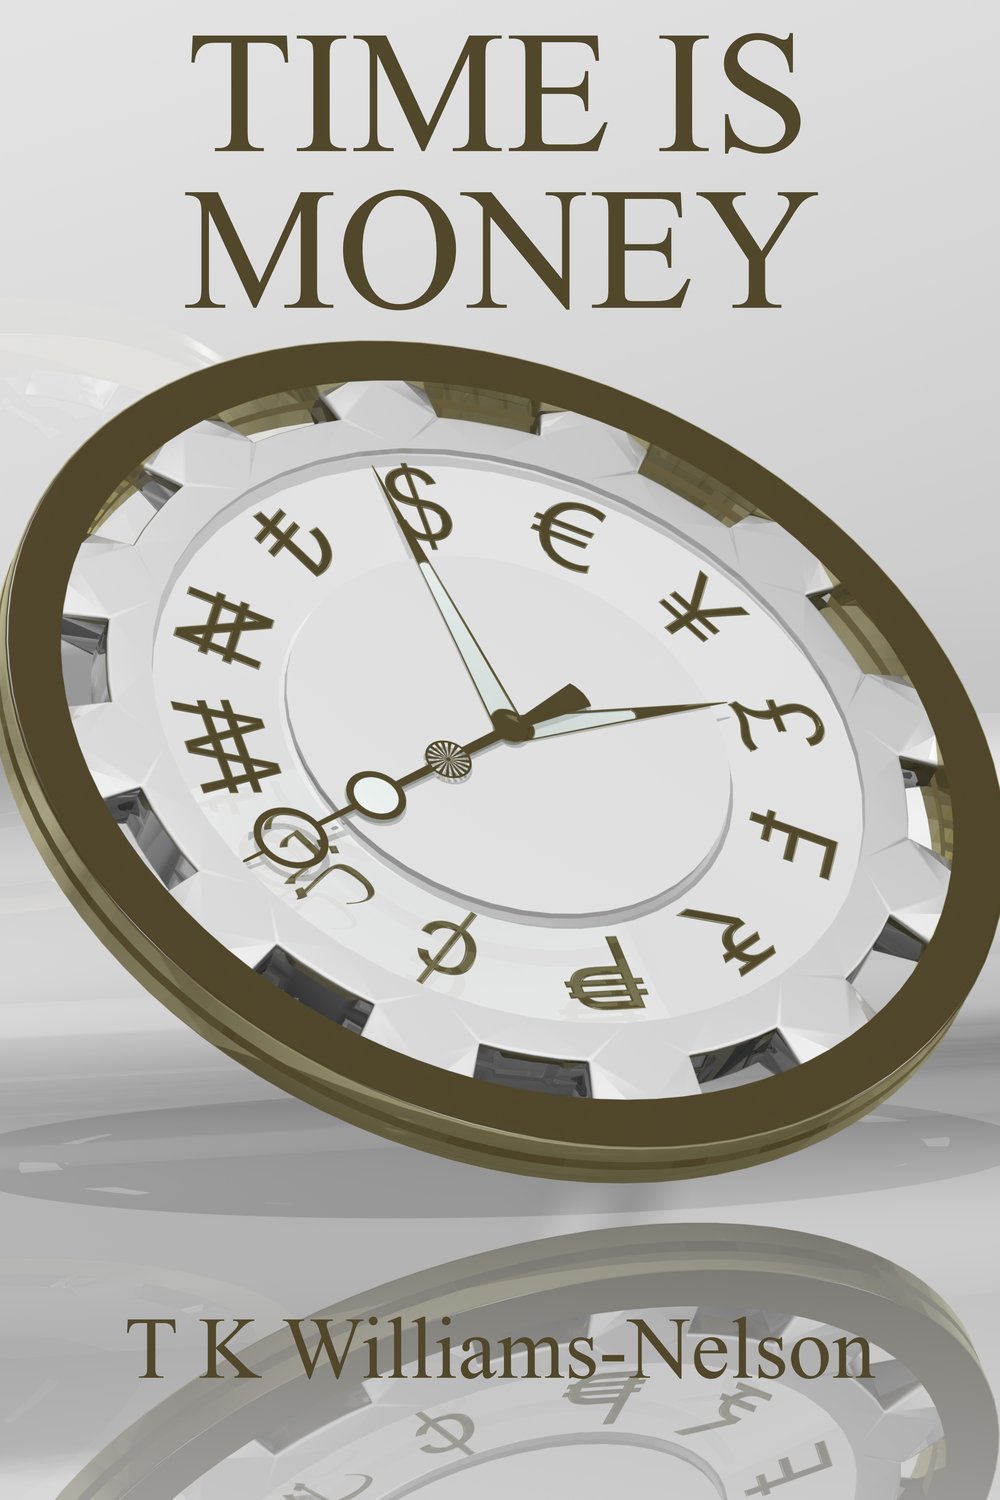 Image of Time is Money Self-Development Book by T K Williams-Nelson